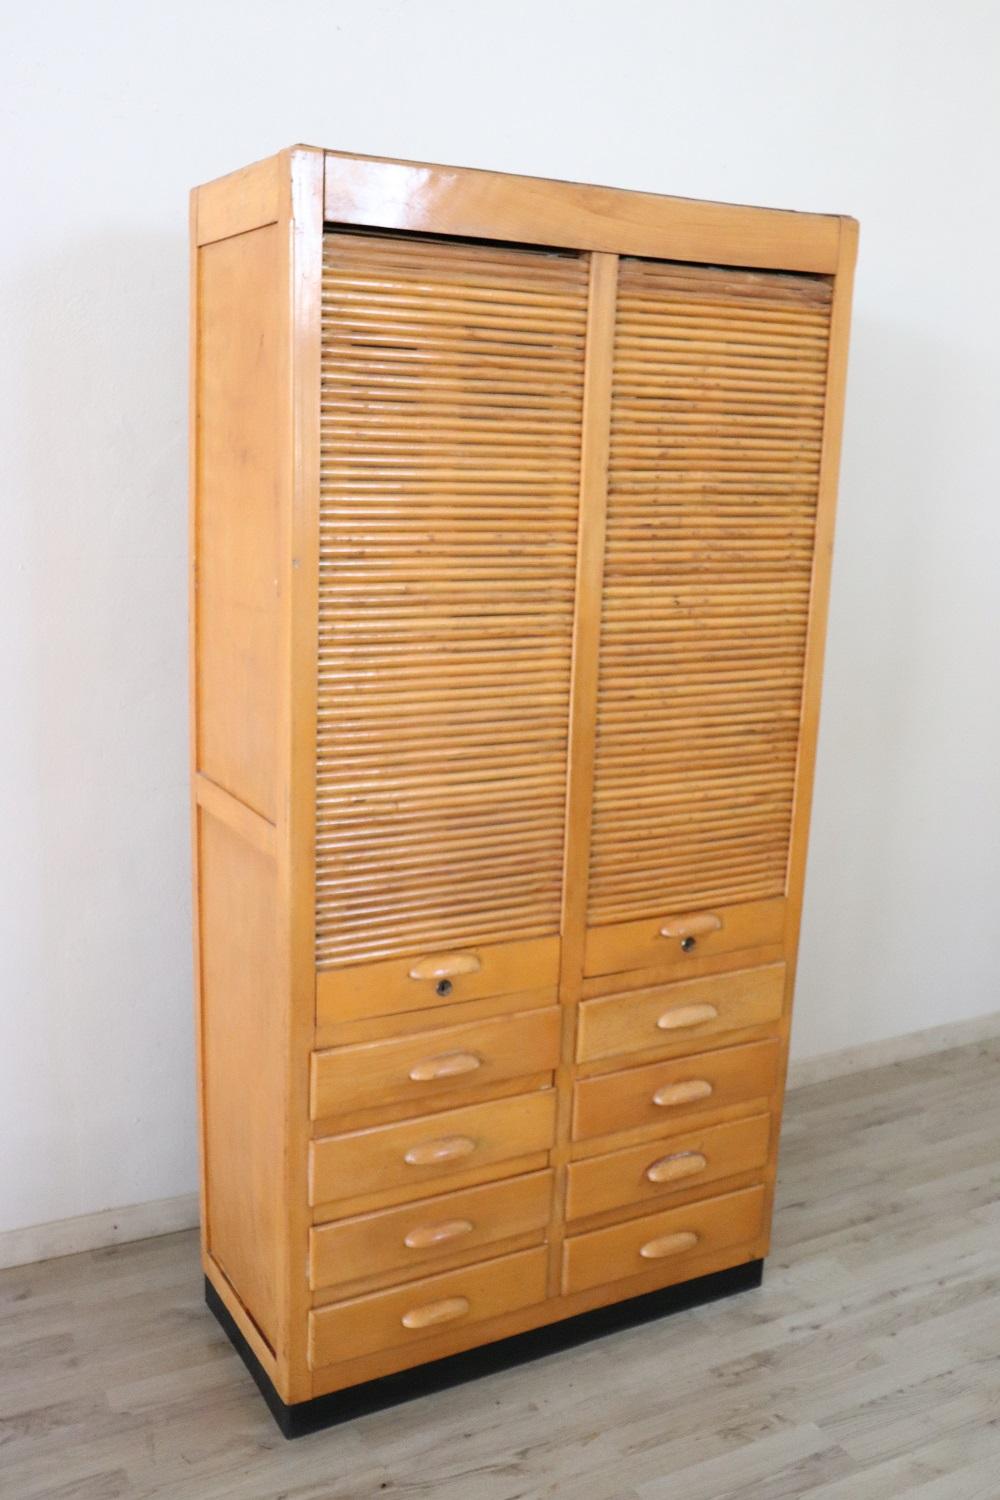 Italian cabinet, 1940s. High quality furniture in solid beechwood. The front doors has a handmade sliding shutter. Equipped with eight comfortable drawers in the lower part.